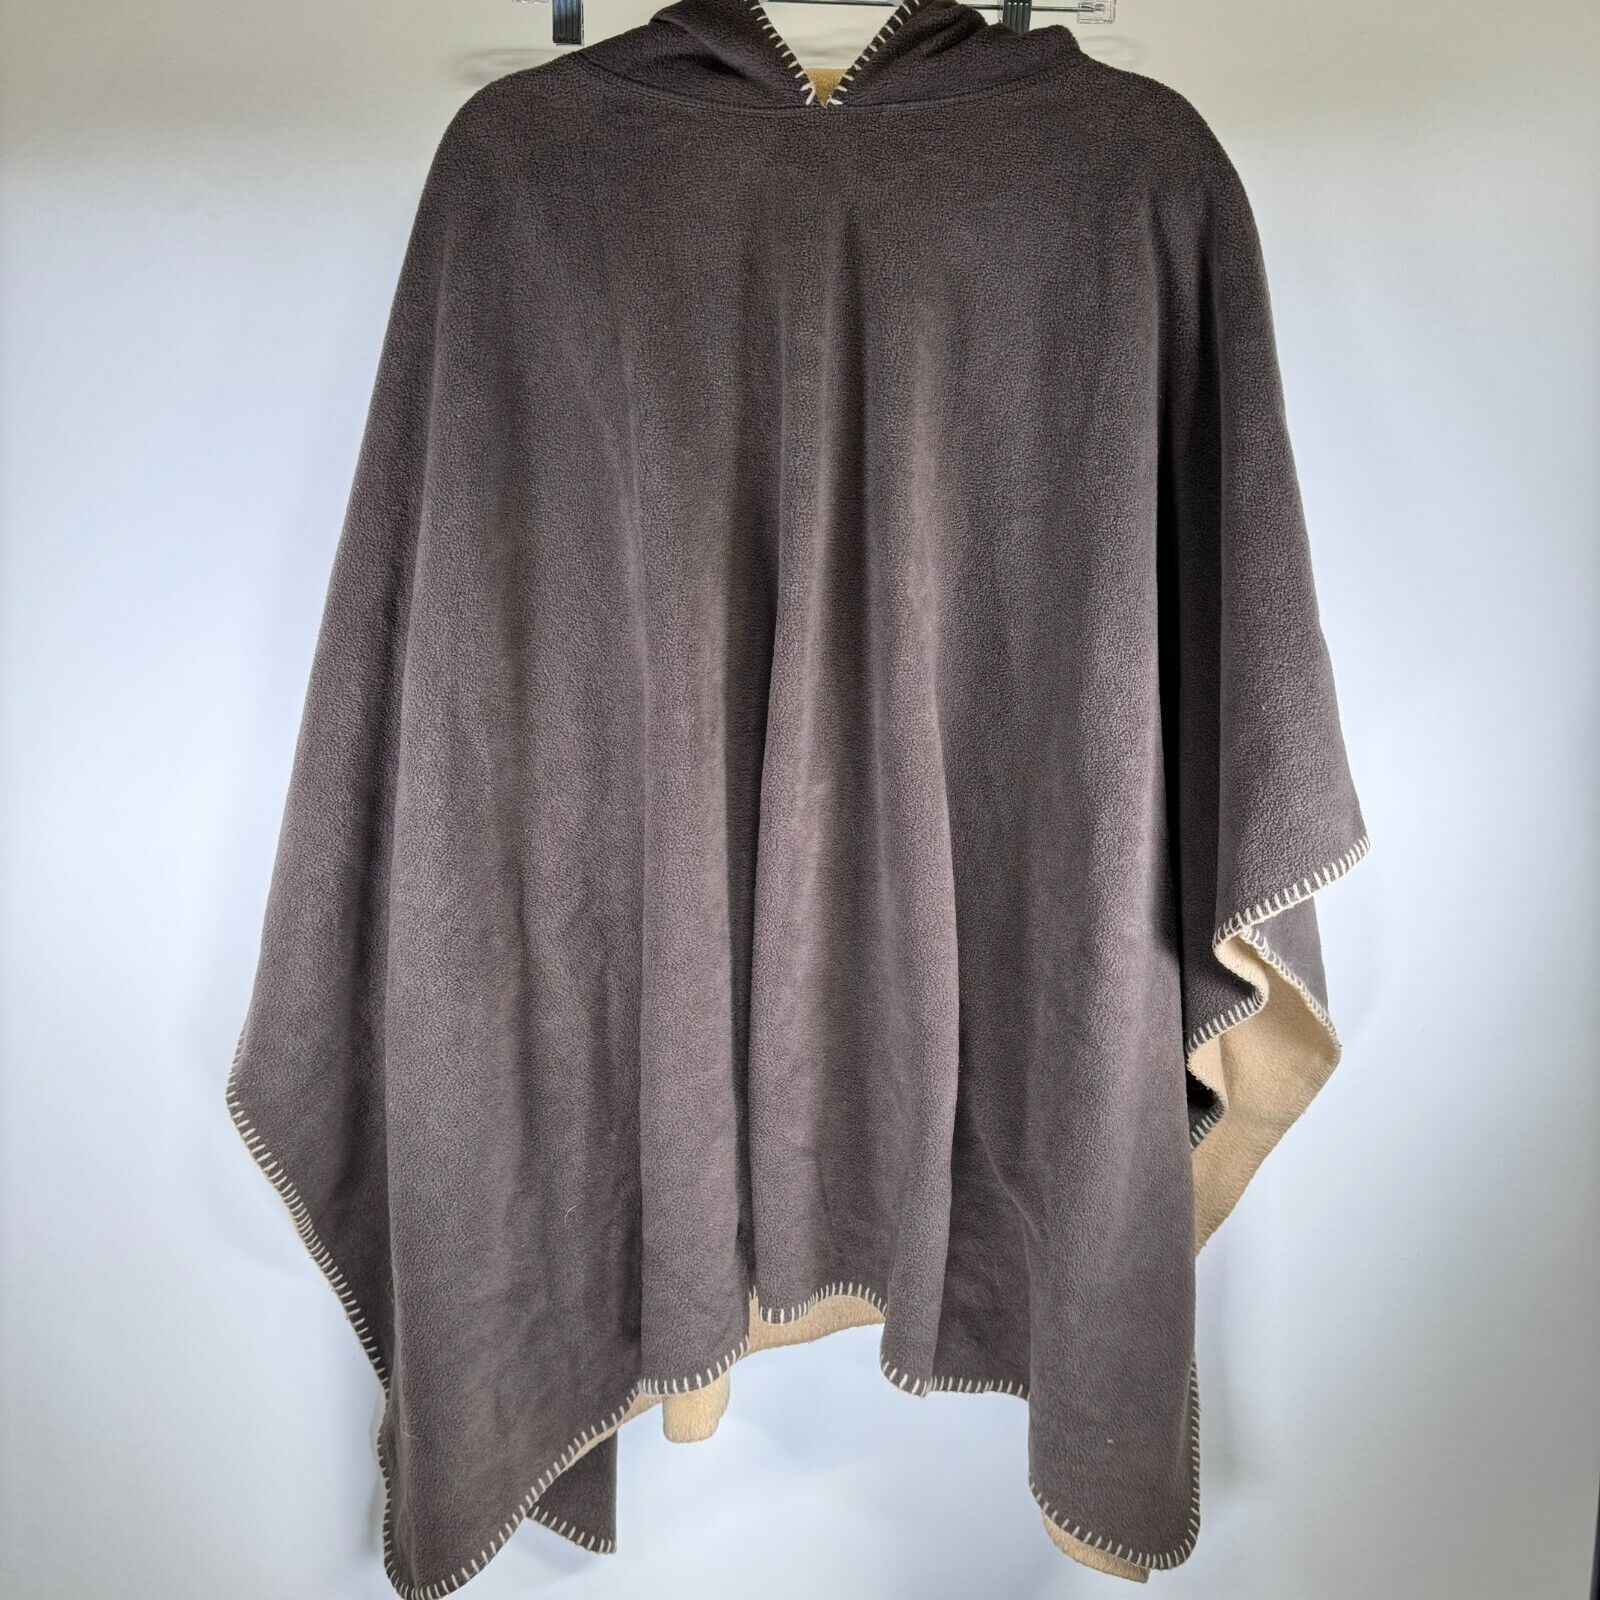 Fleece Poncho Unisex One Size 45W x 30L Brown Tan Pull over Hooded Soft Warm